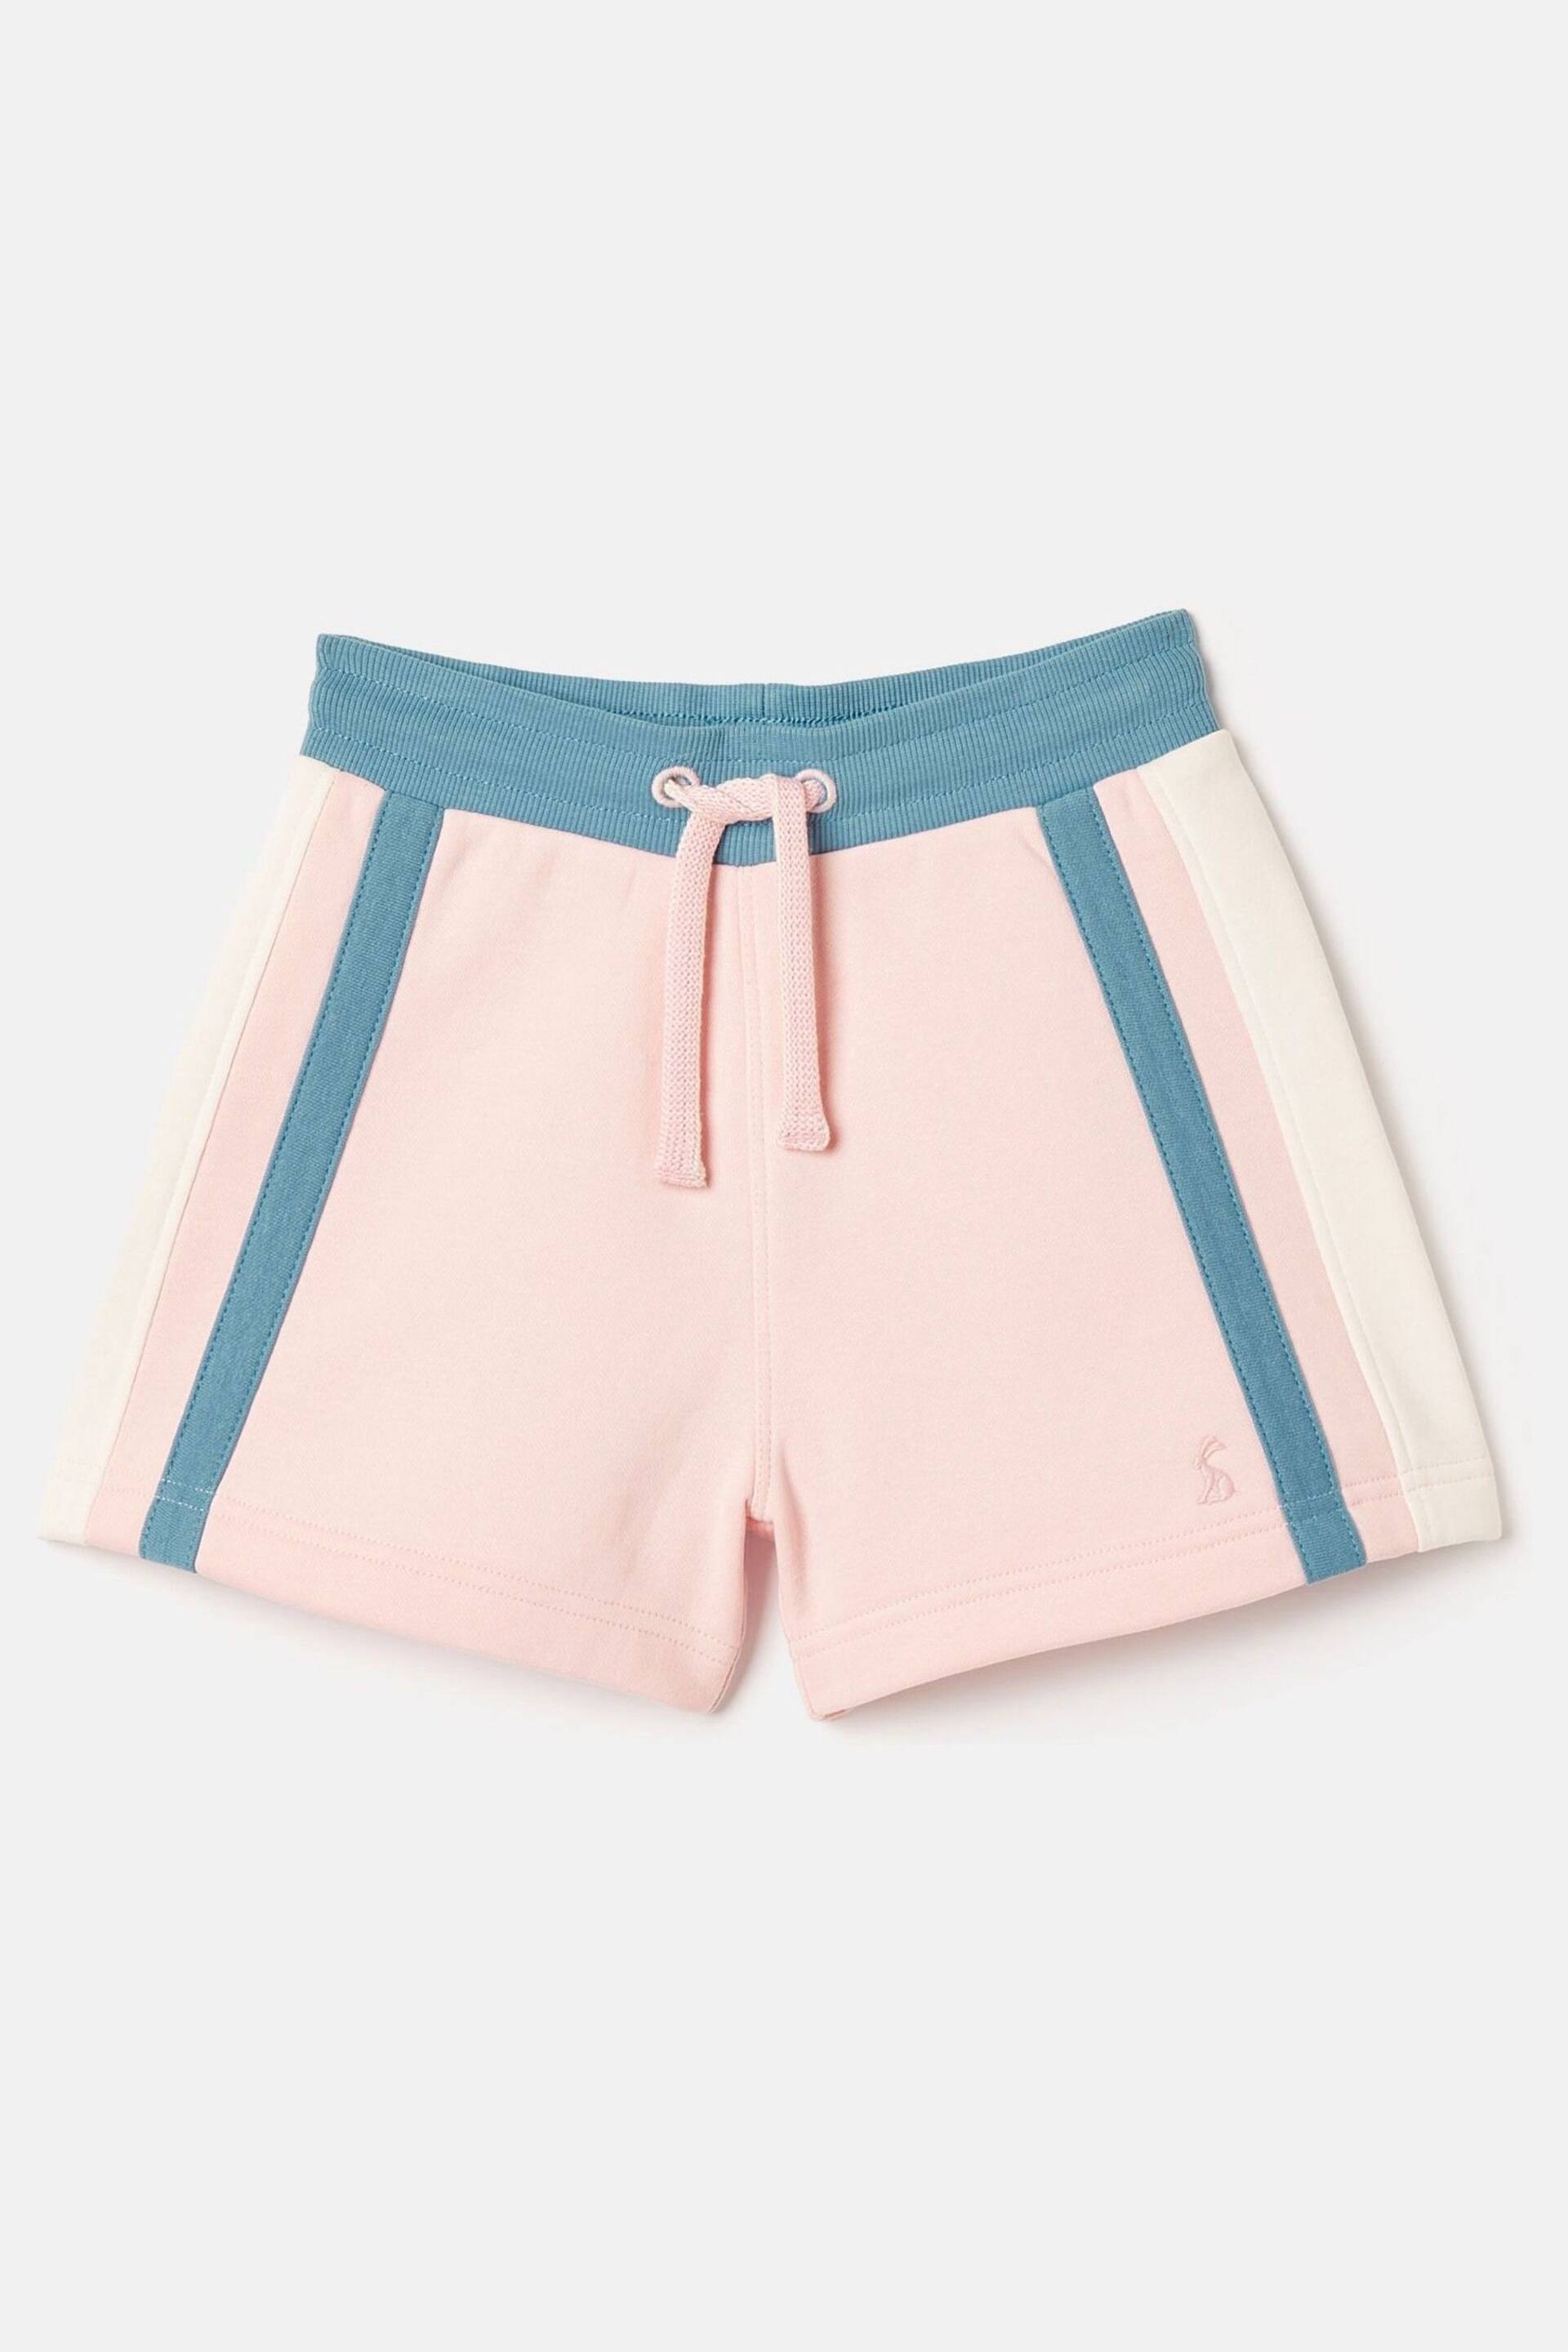 Joules Pippa Pink Colour Block Jersey Shorts - Image 1 of 8